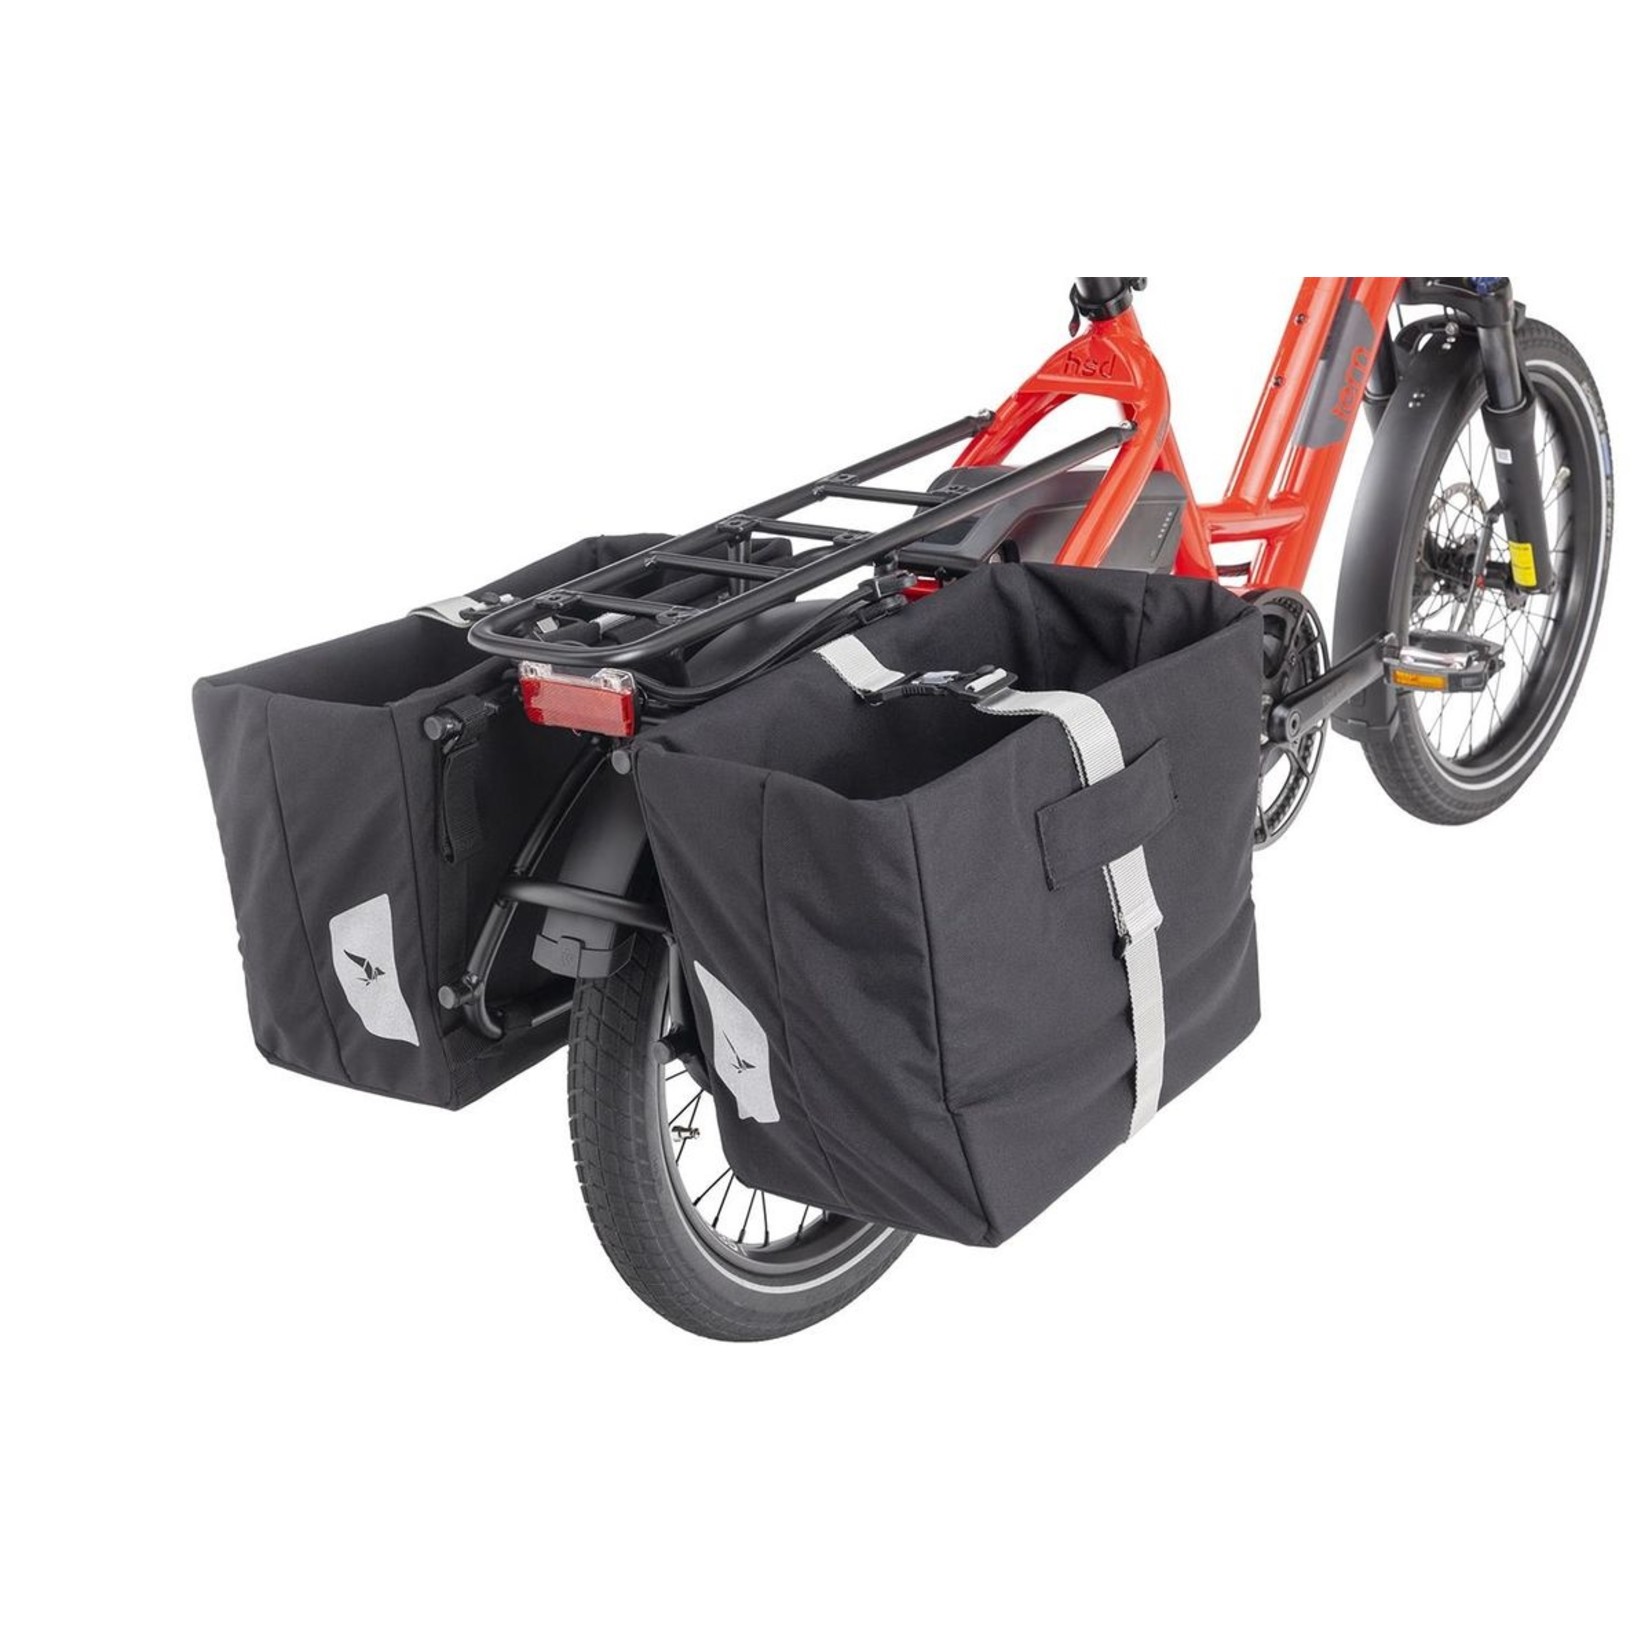 Tern Tern HSD & GSD Accessory Cargo Hold 37 Panniers Water Resistant 74L / 38kg per pair